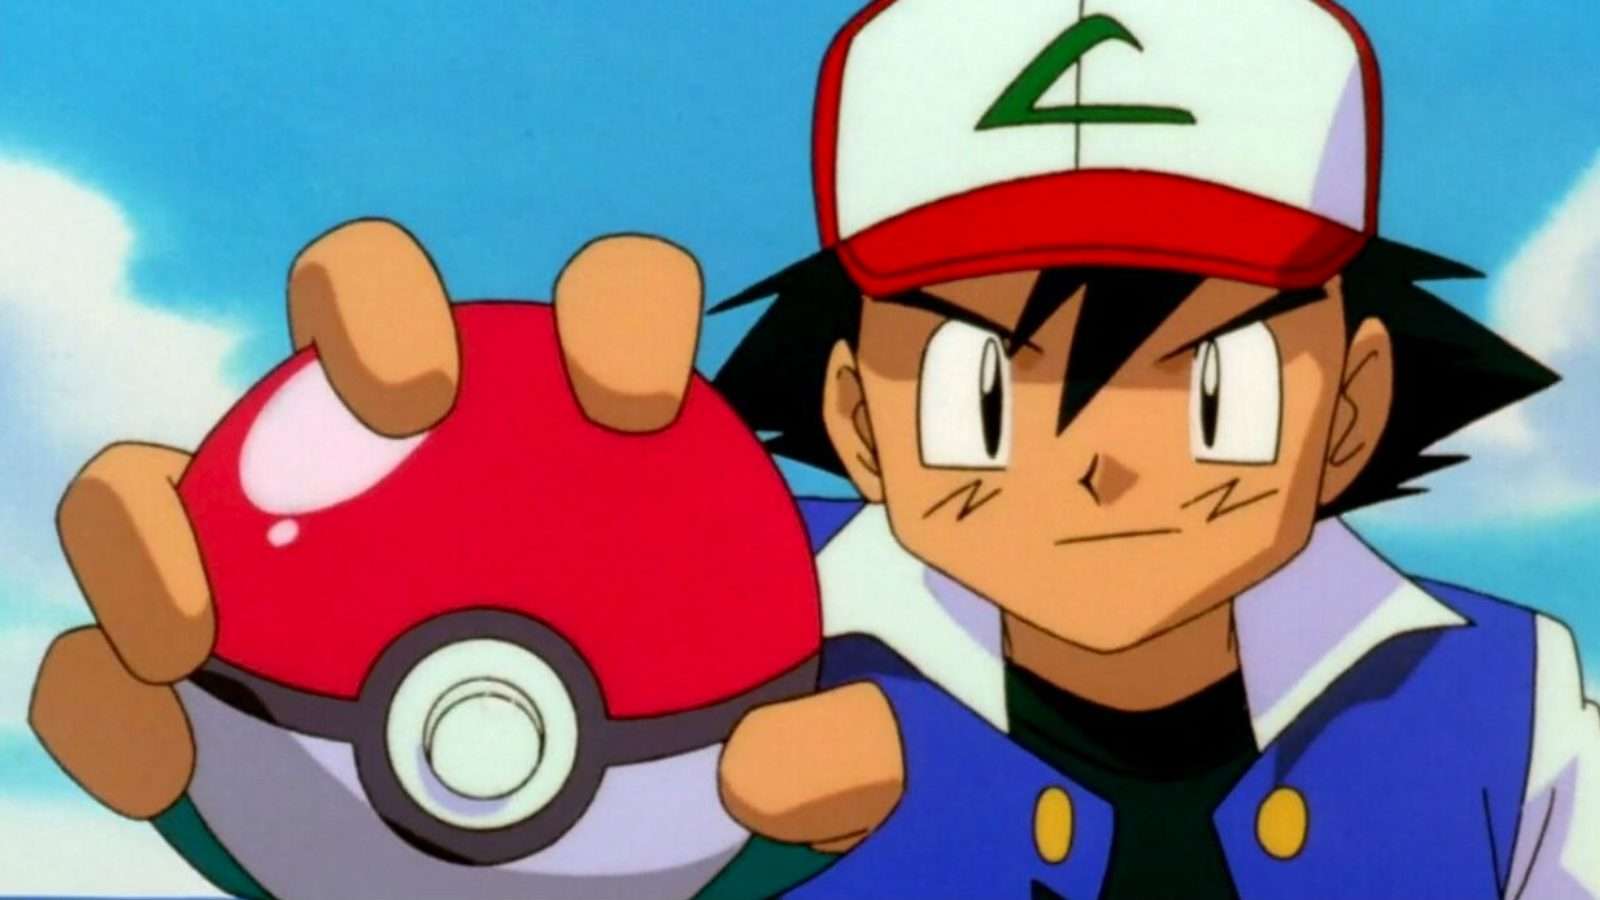 Ash Ketchum from Pokemon Go catching a Pokemon with a Poke Ball.